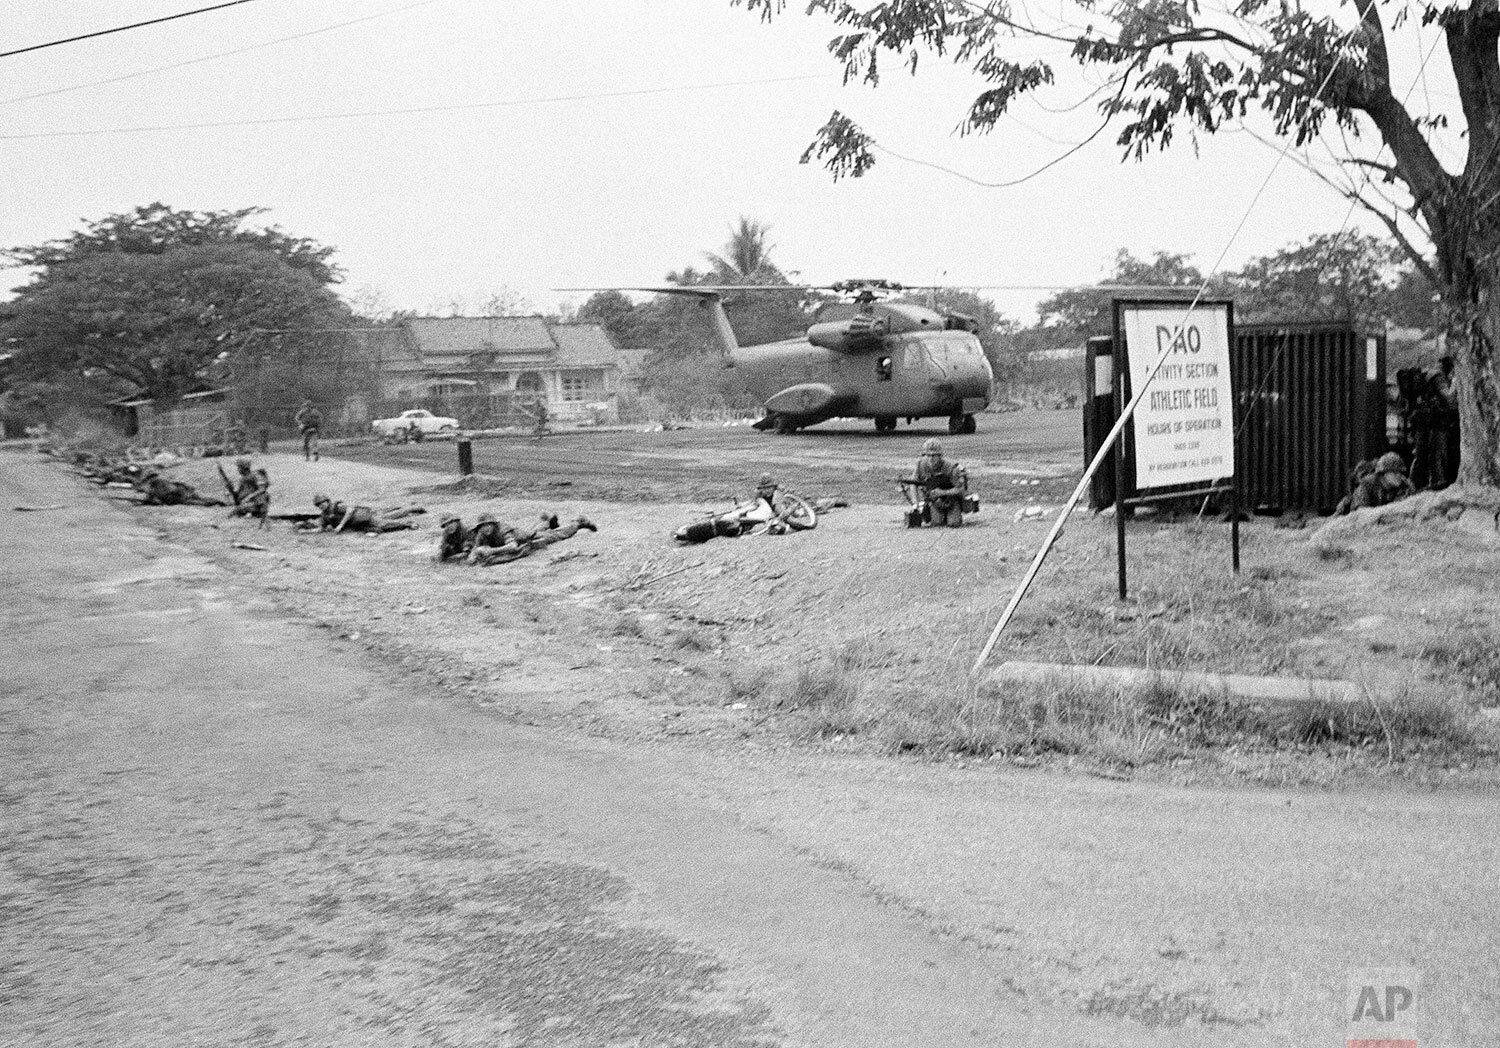  U.S. Marines drop to prone firing position to guard helicopter at landing zone at former U.S. Military headquarters at Tan Son Nhut airport during evacuation from Saigon on April 29, 1975. (AP Photo) 